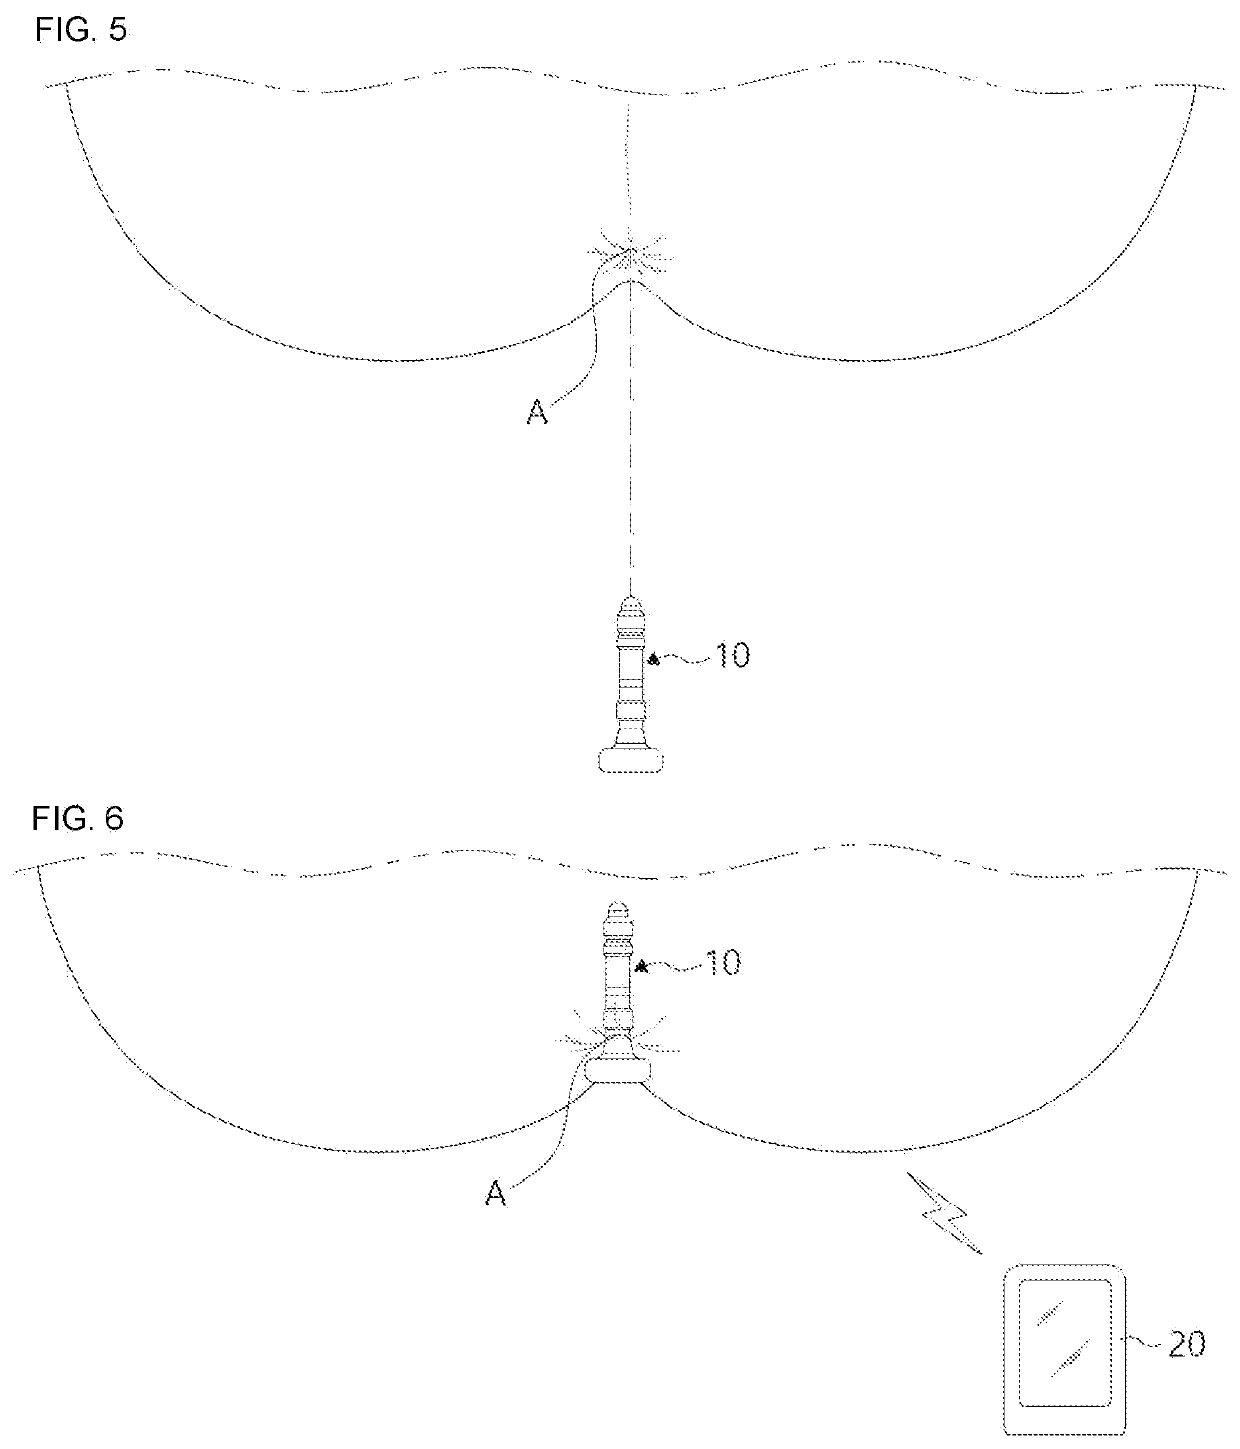 Prostate and hemorrhoid treatment device